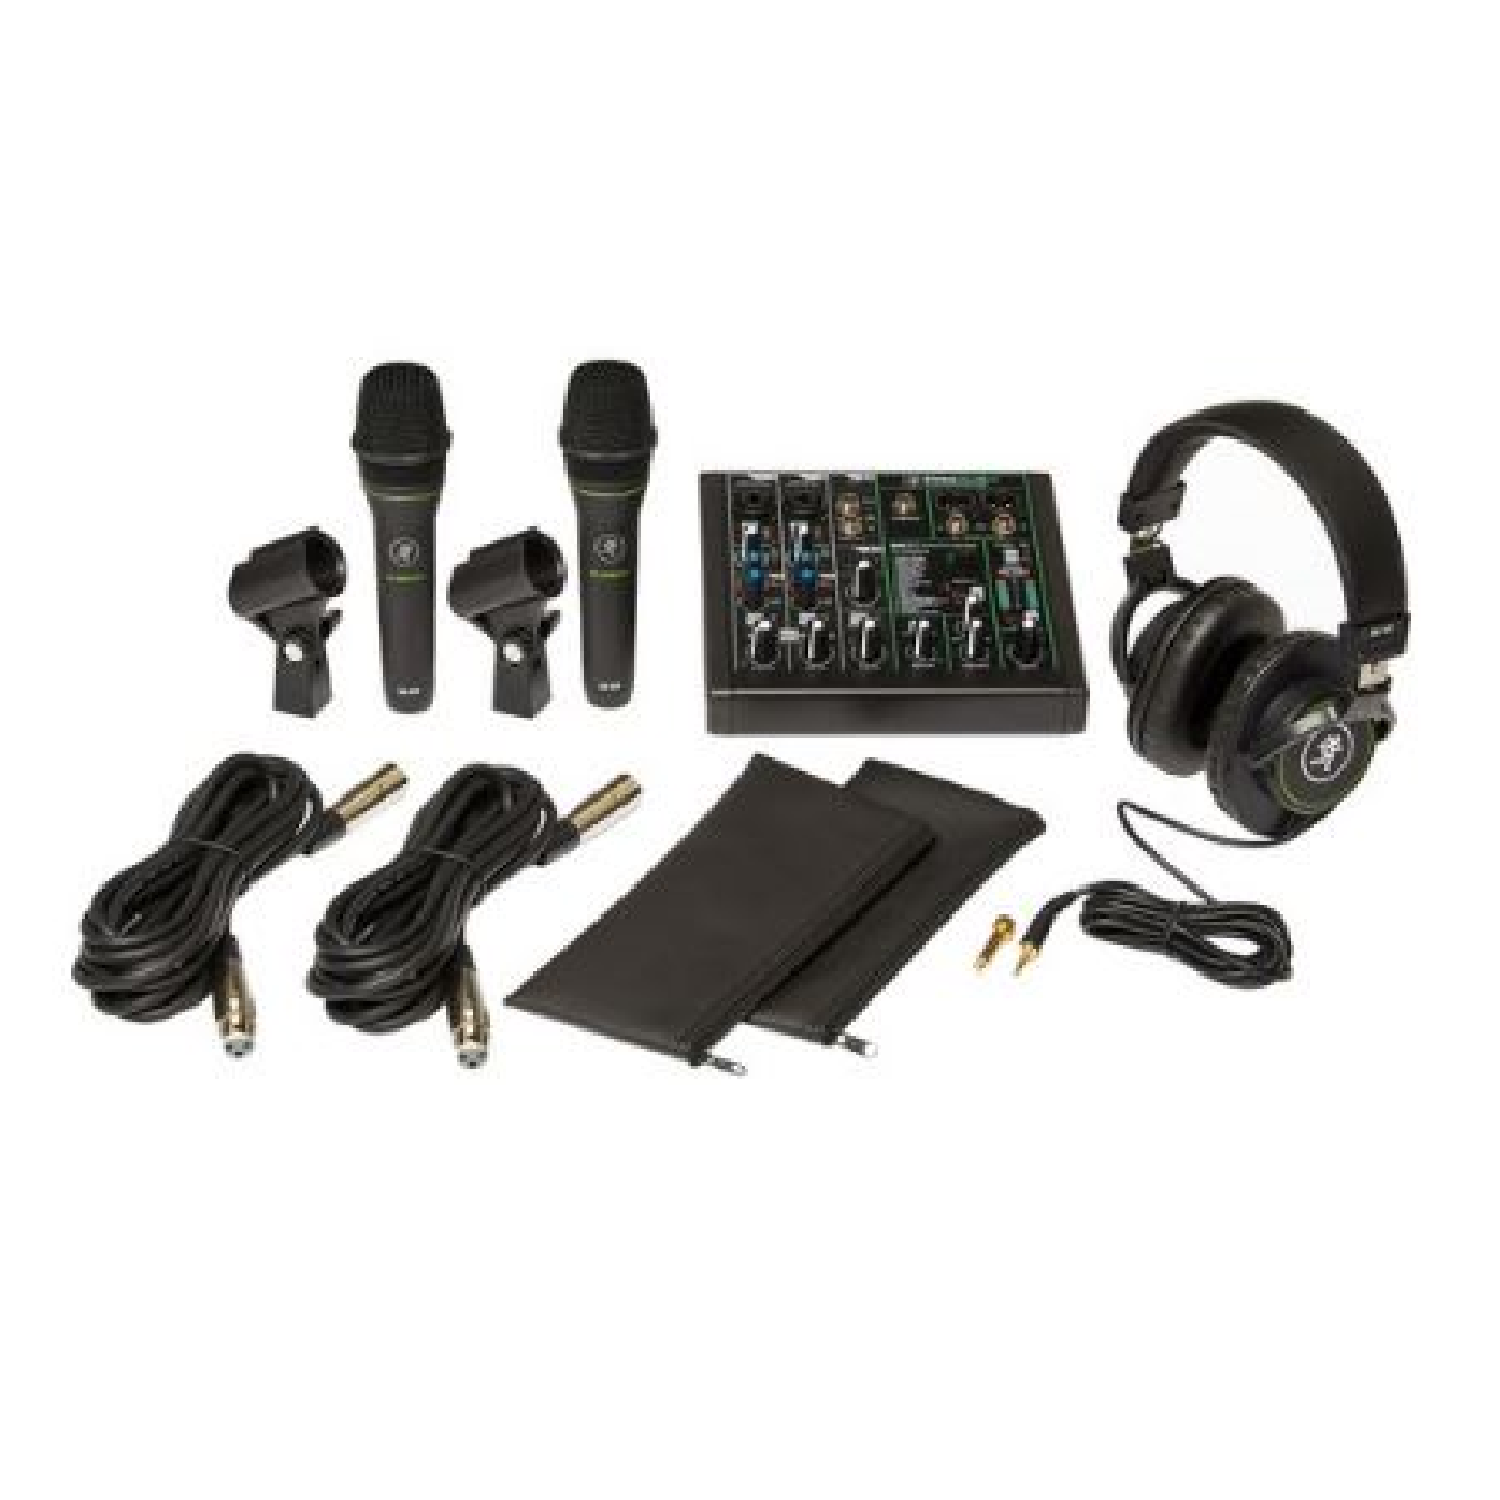 Performer Bundle 6 Channel Mixer, Two Dynamic Vocal Microphones and Headphone   Performer Bundle mackie